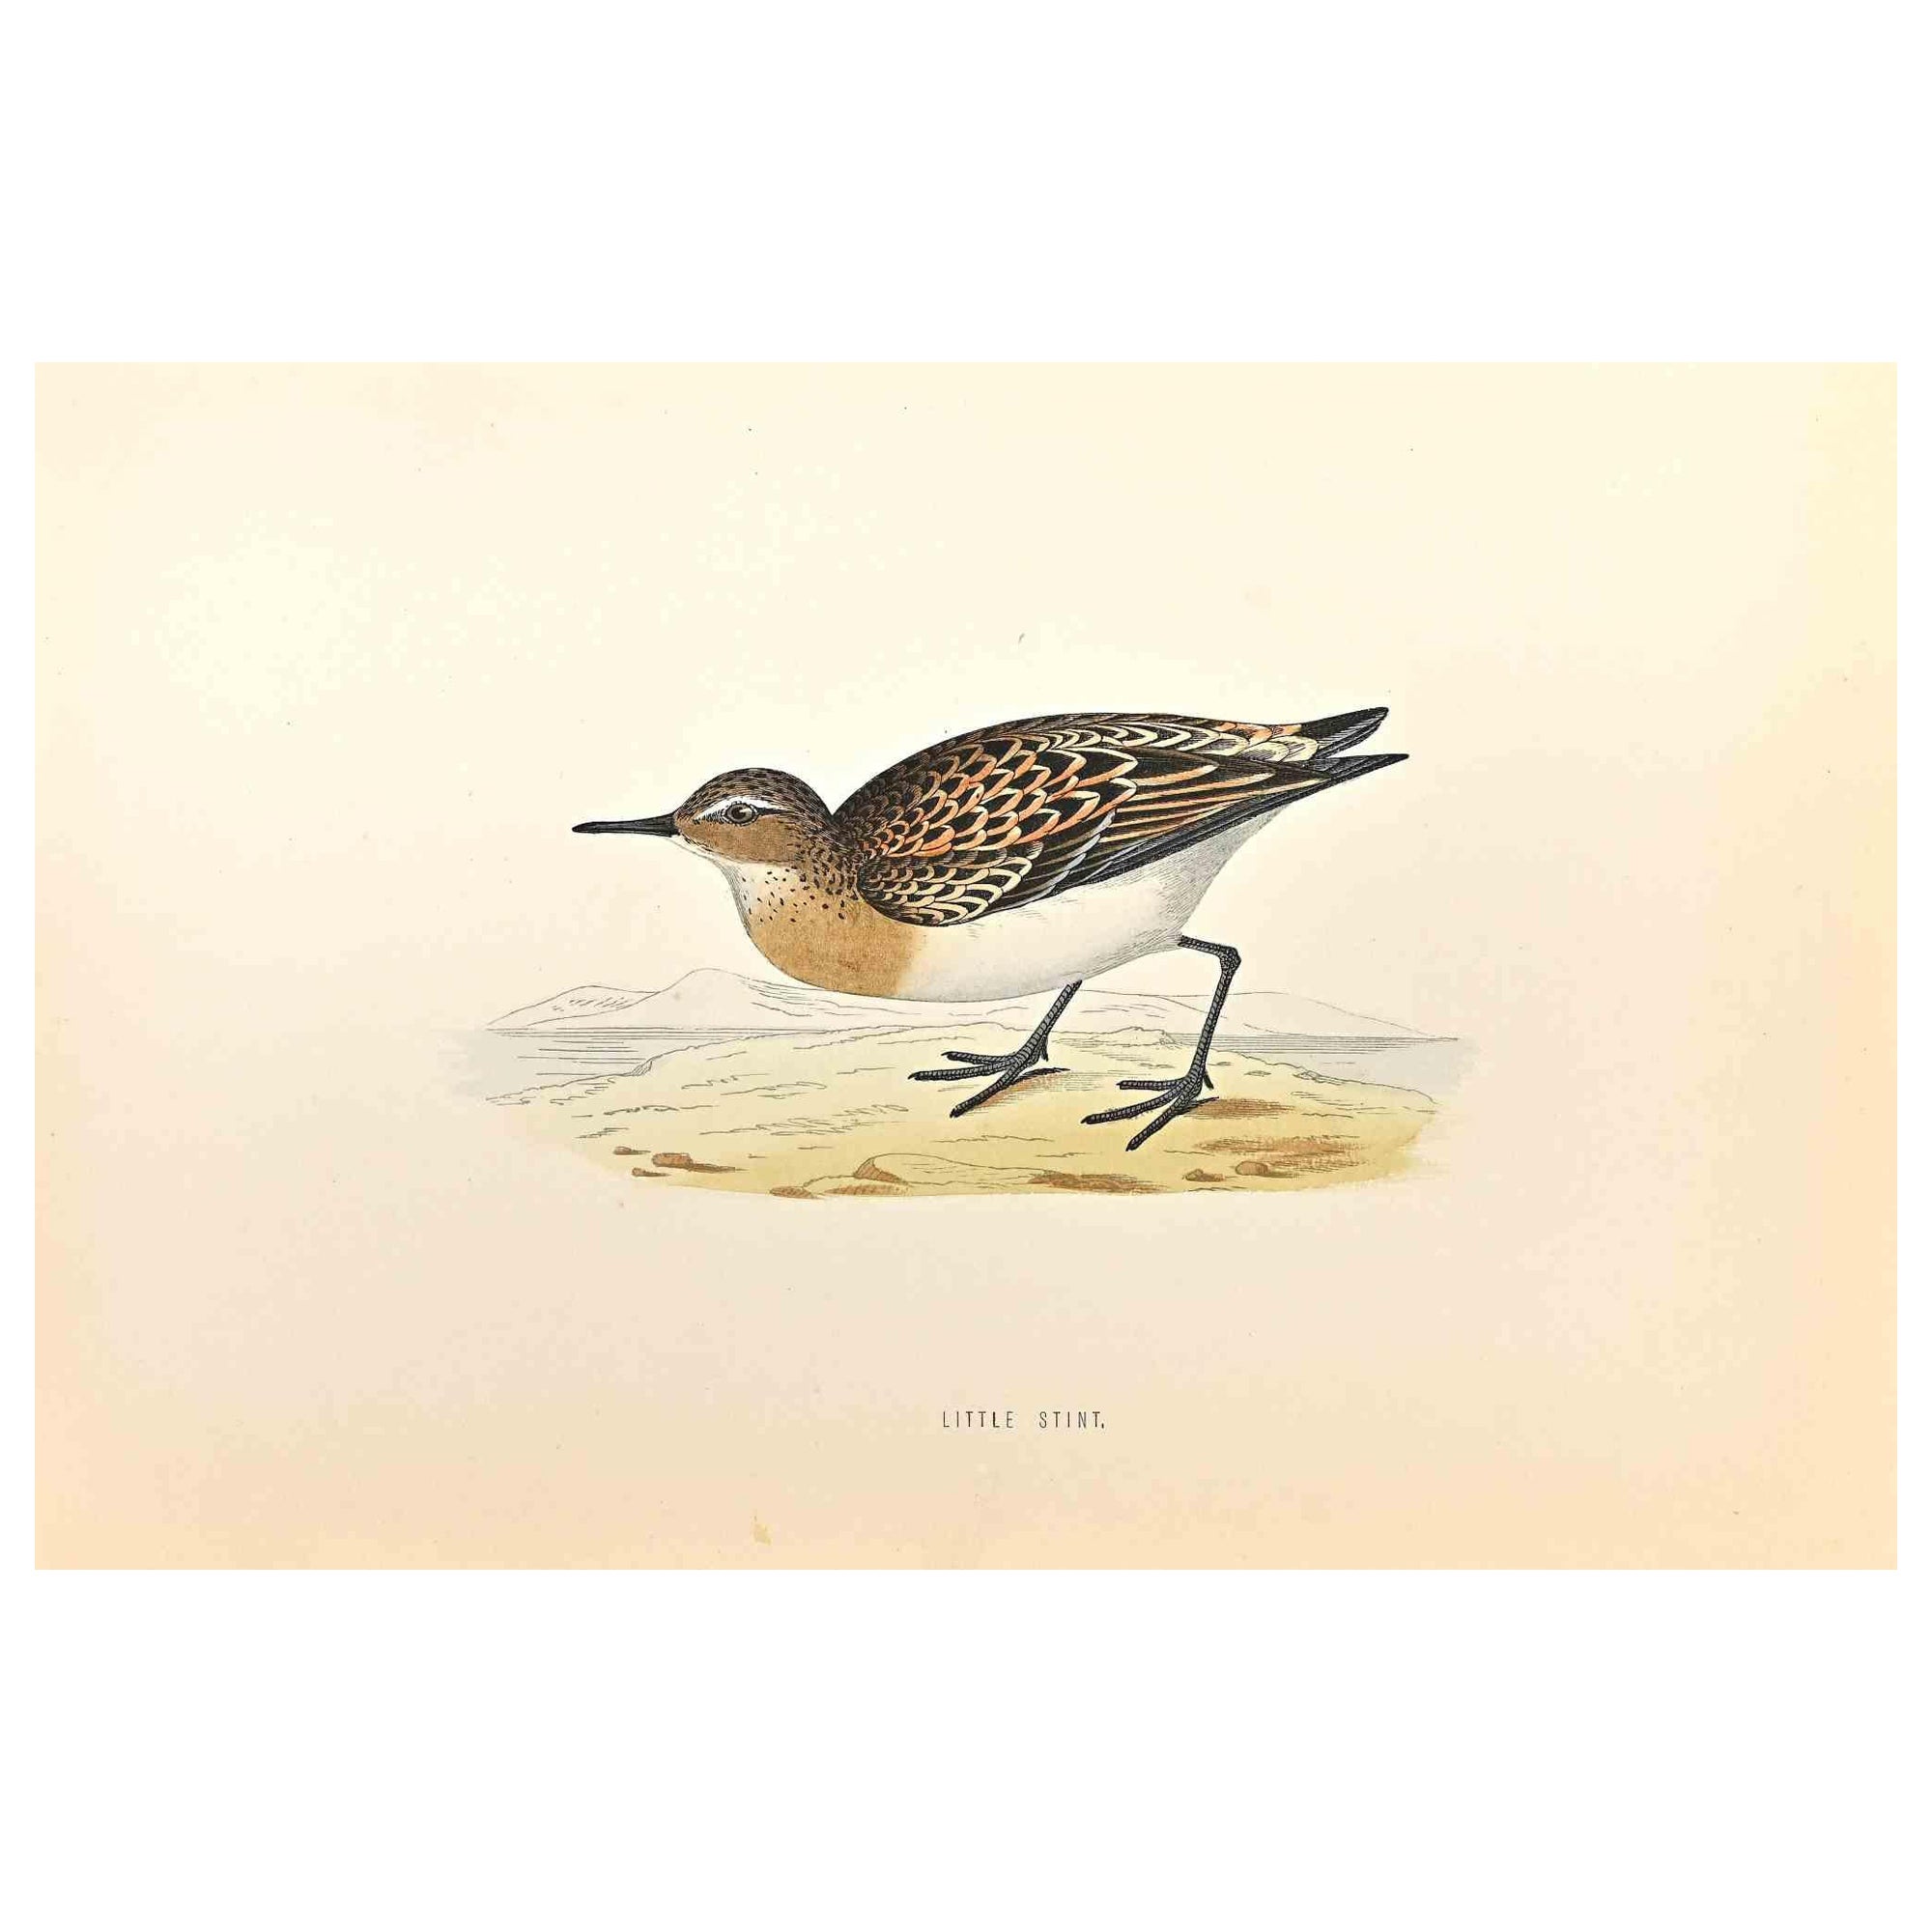 Little Stint is a modern artwork realized in 1870 by the British artist Alexander Francis Lydon (1836-1917) . 

Woodcut print on ivory-colored paper.

Hand-colored, published by London, Bell & Sons, 1870.  

The name of the bird is printed on the